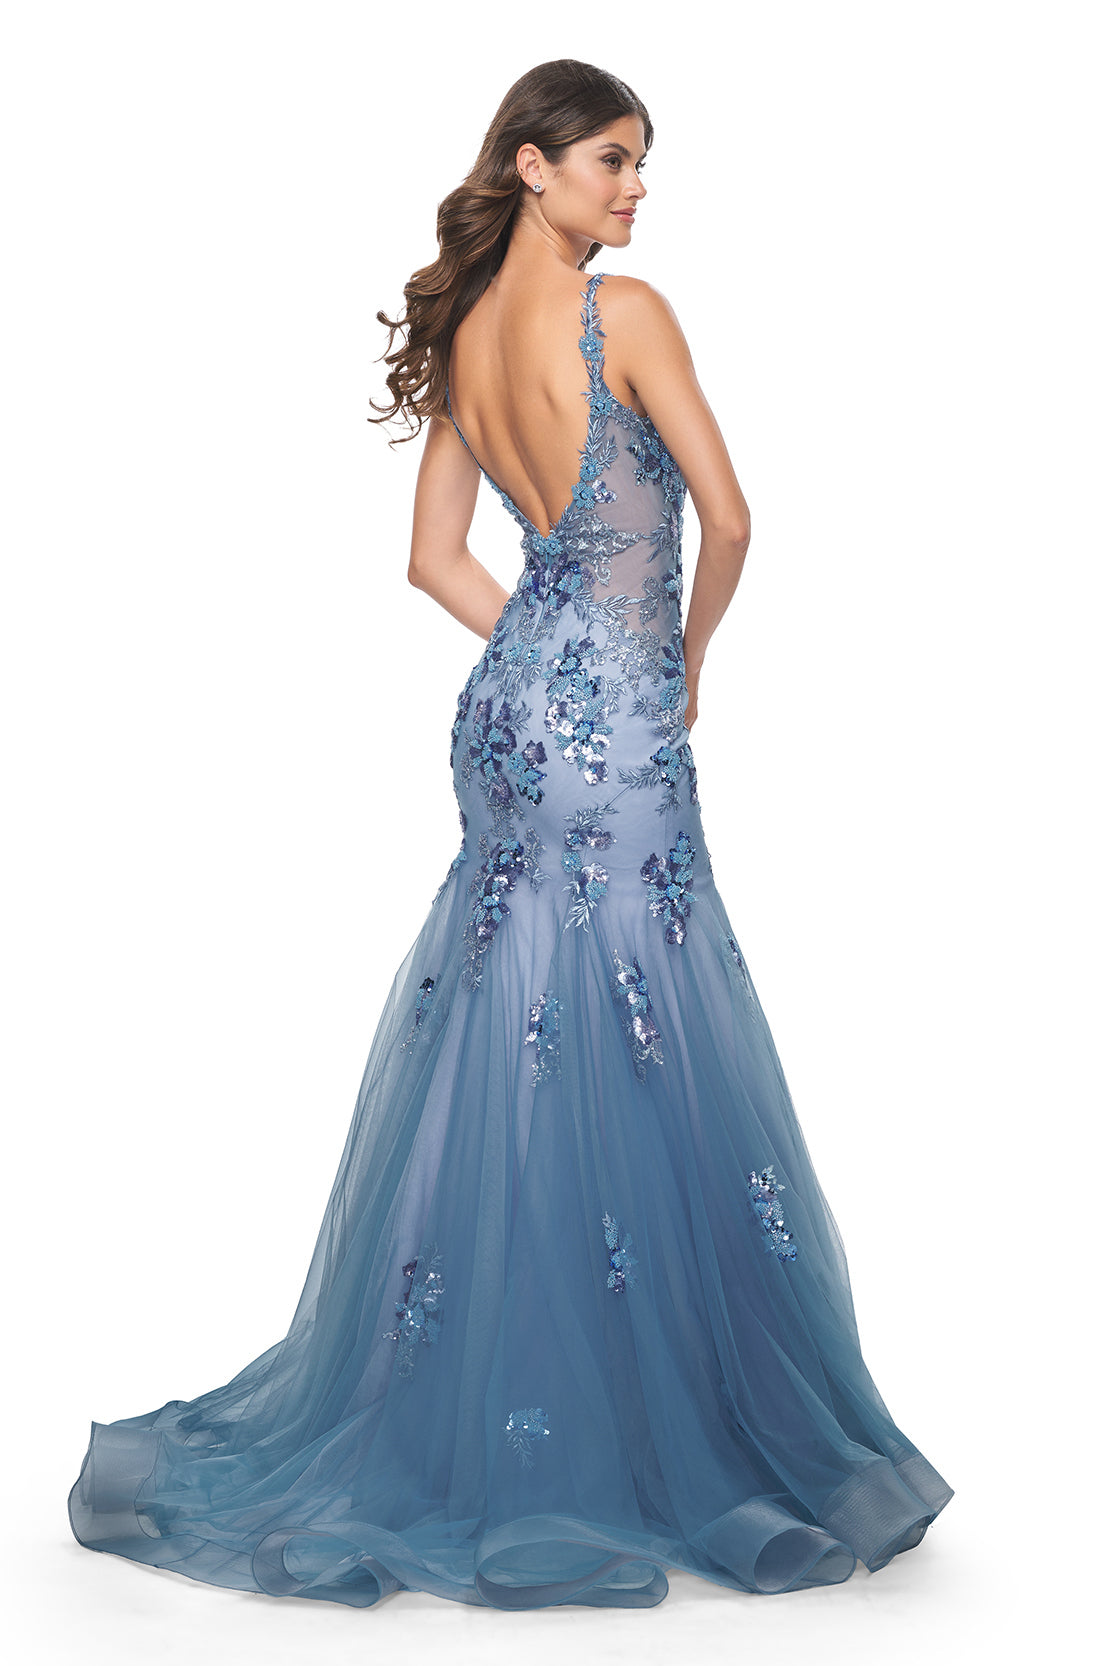 La Femme 32192 Two-Tone Mermaid Prom Gown - A stunning mermaid gown with a two-tone design, V neckline, sequin lace beaded floral applique, and illusion sides and back for an enchanting and captivating look. Perfect for prom night.